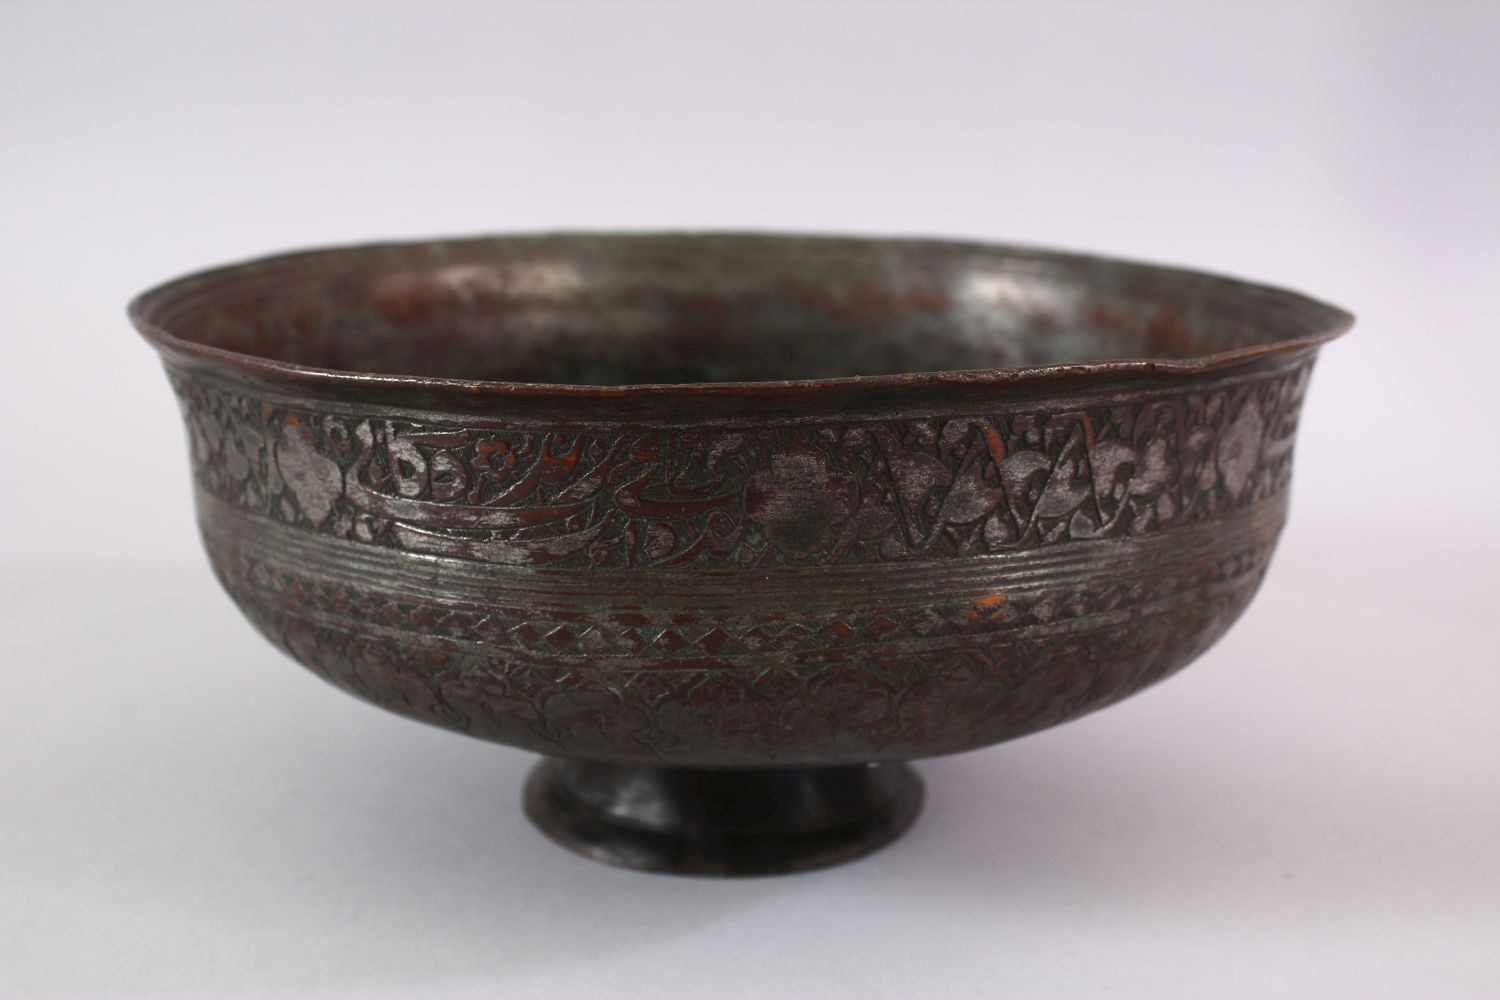 A 19TH CENTURY IRAN PERSIAN SAFAVID CALLIGRAPHIC BRONZE BOWL, with bands of calligraphy and floral - Image 2 of 6